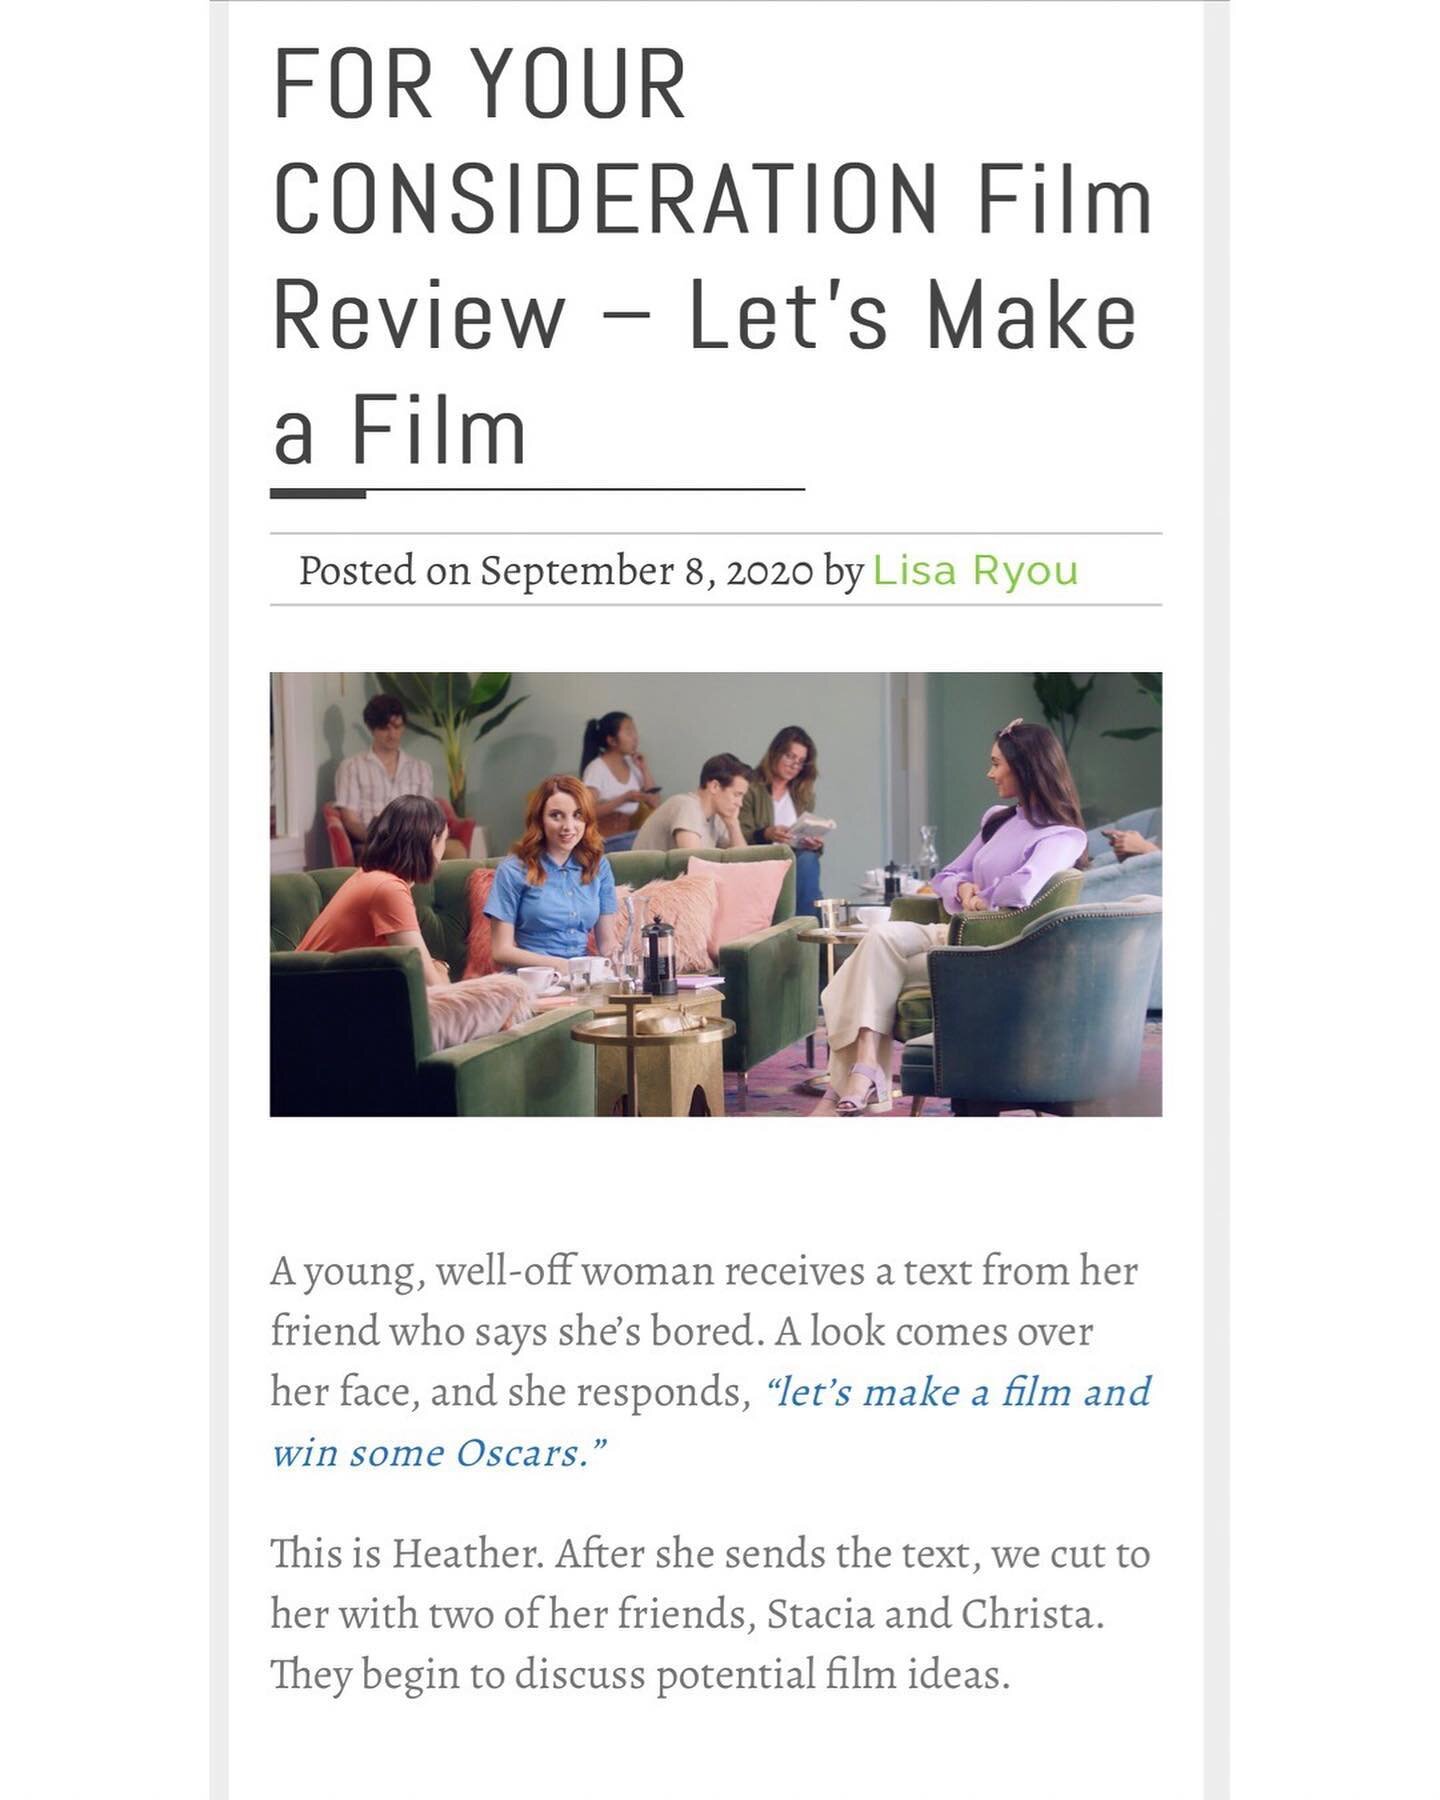 Thank you @picturethispost and Lisa Ryou for the thoughtful review! Check it out. Link in bio and for fb it&rsquo;s https://linktr.ee/Fycfilm 💝